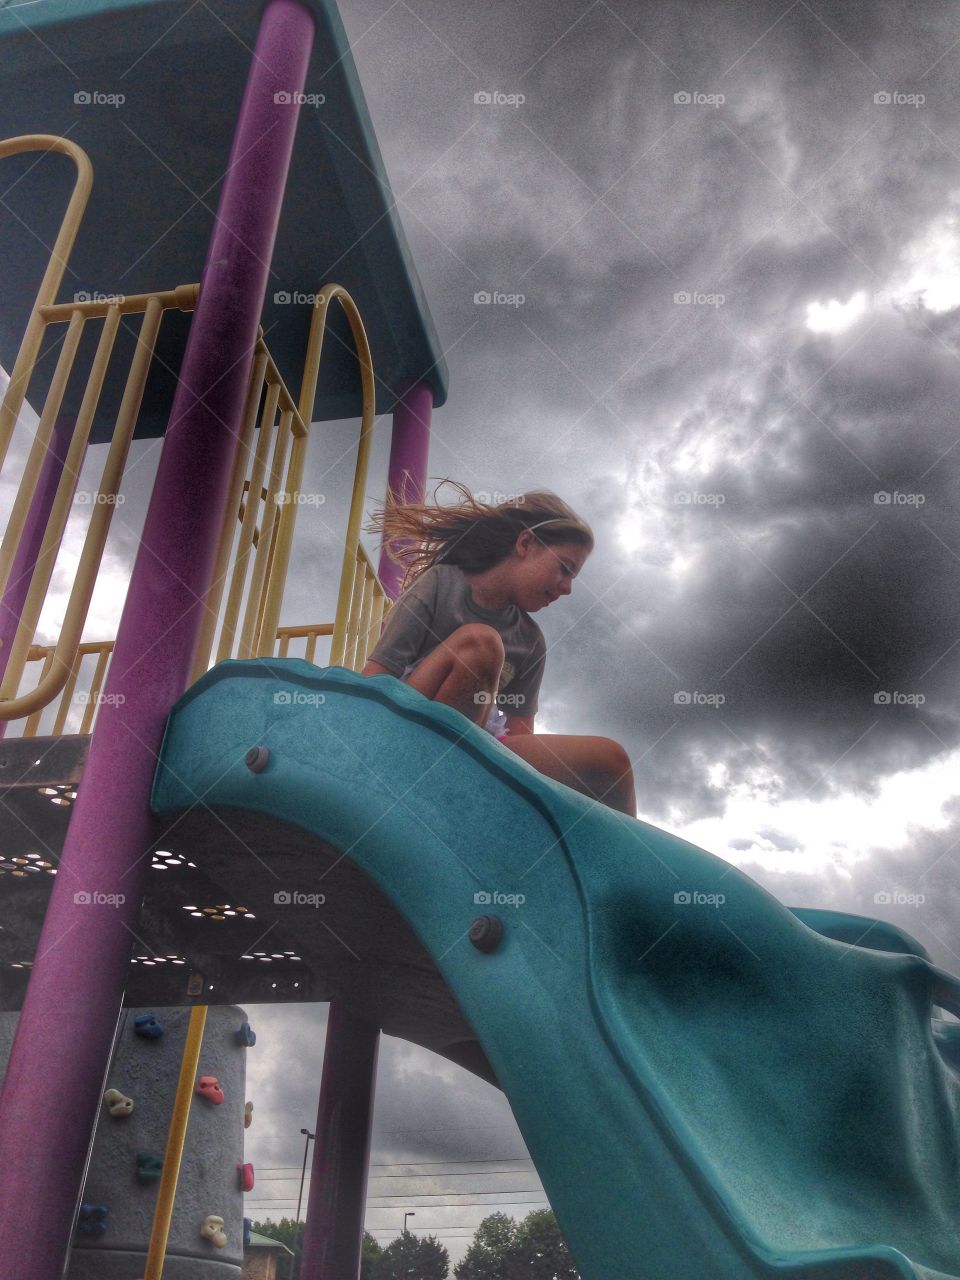 Slide into the storm . Girl sliding down a slide and storm clouds in the background. 